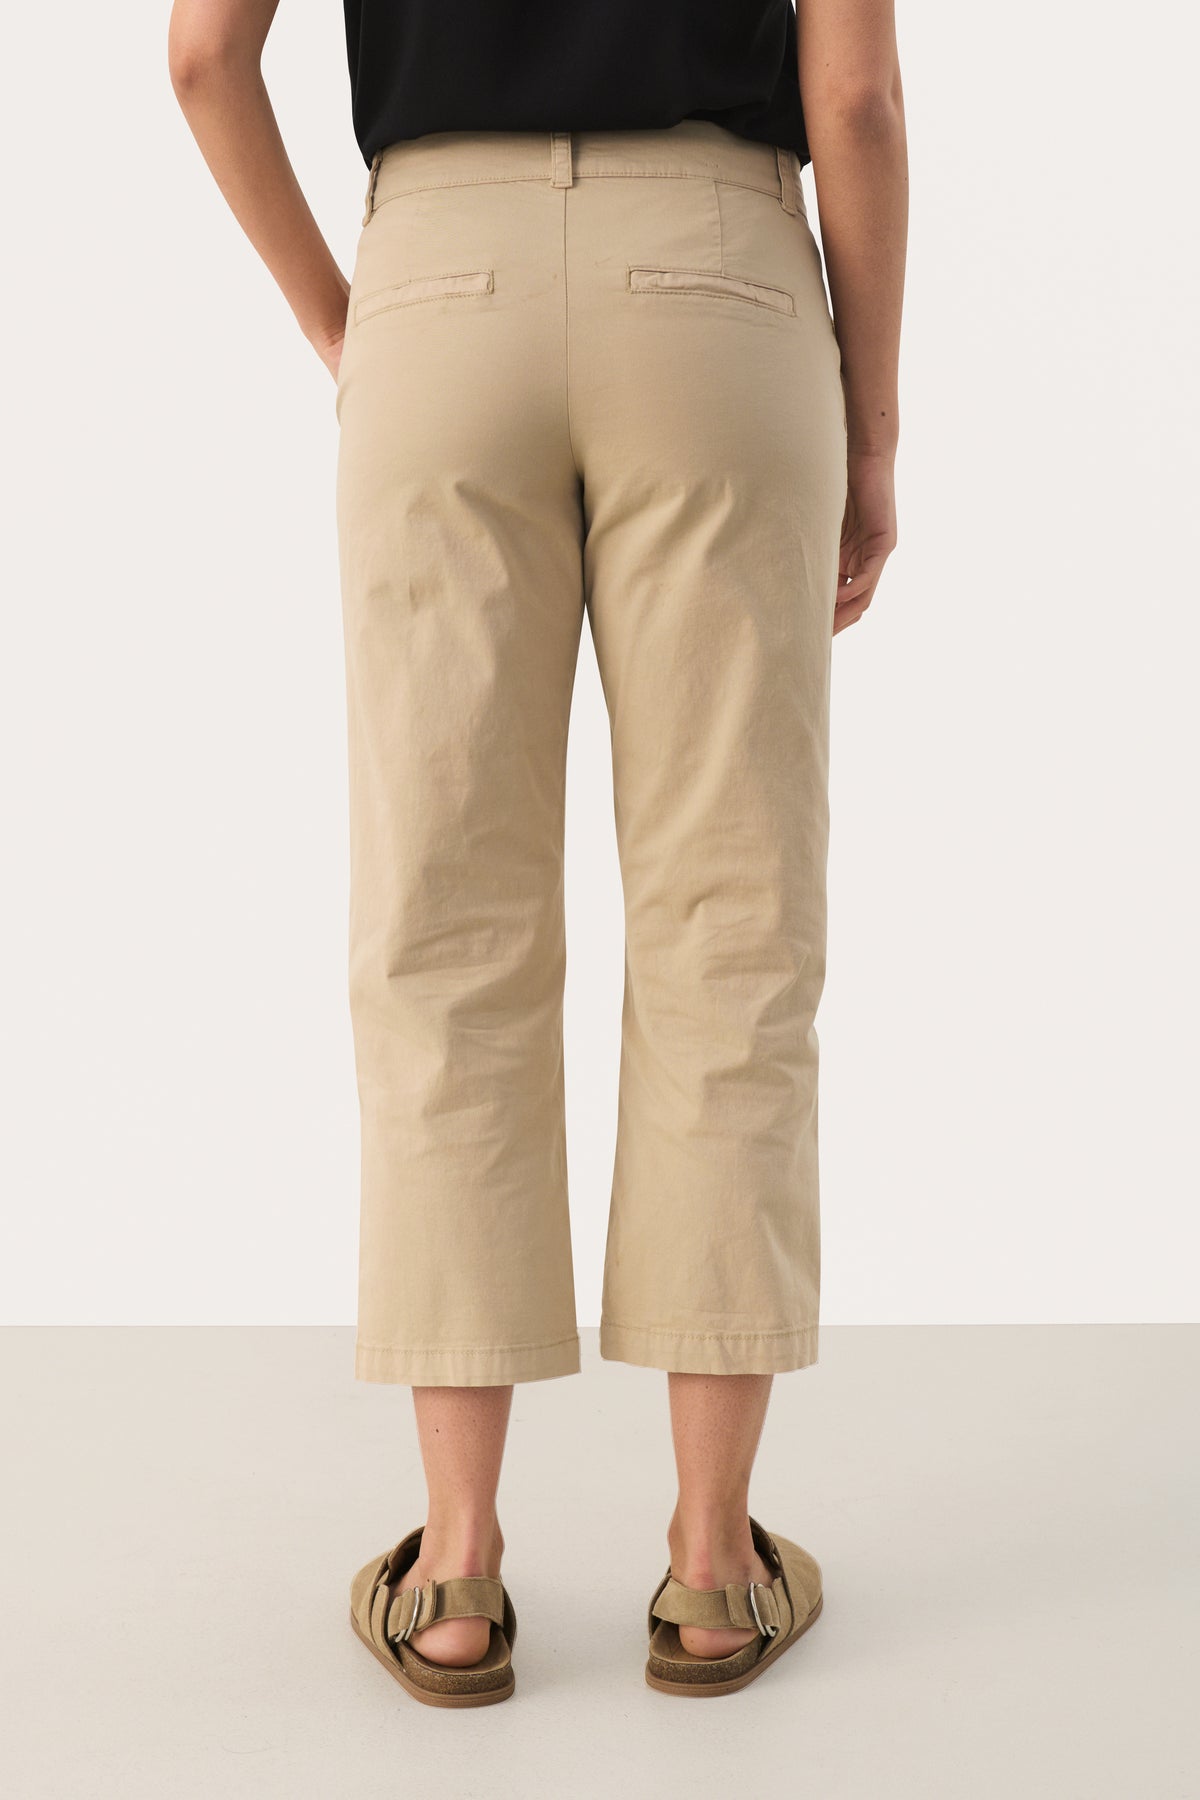 30308589 WHITE PEPPER Part Two Chino court Soffyns